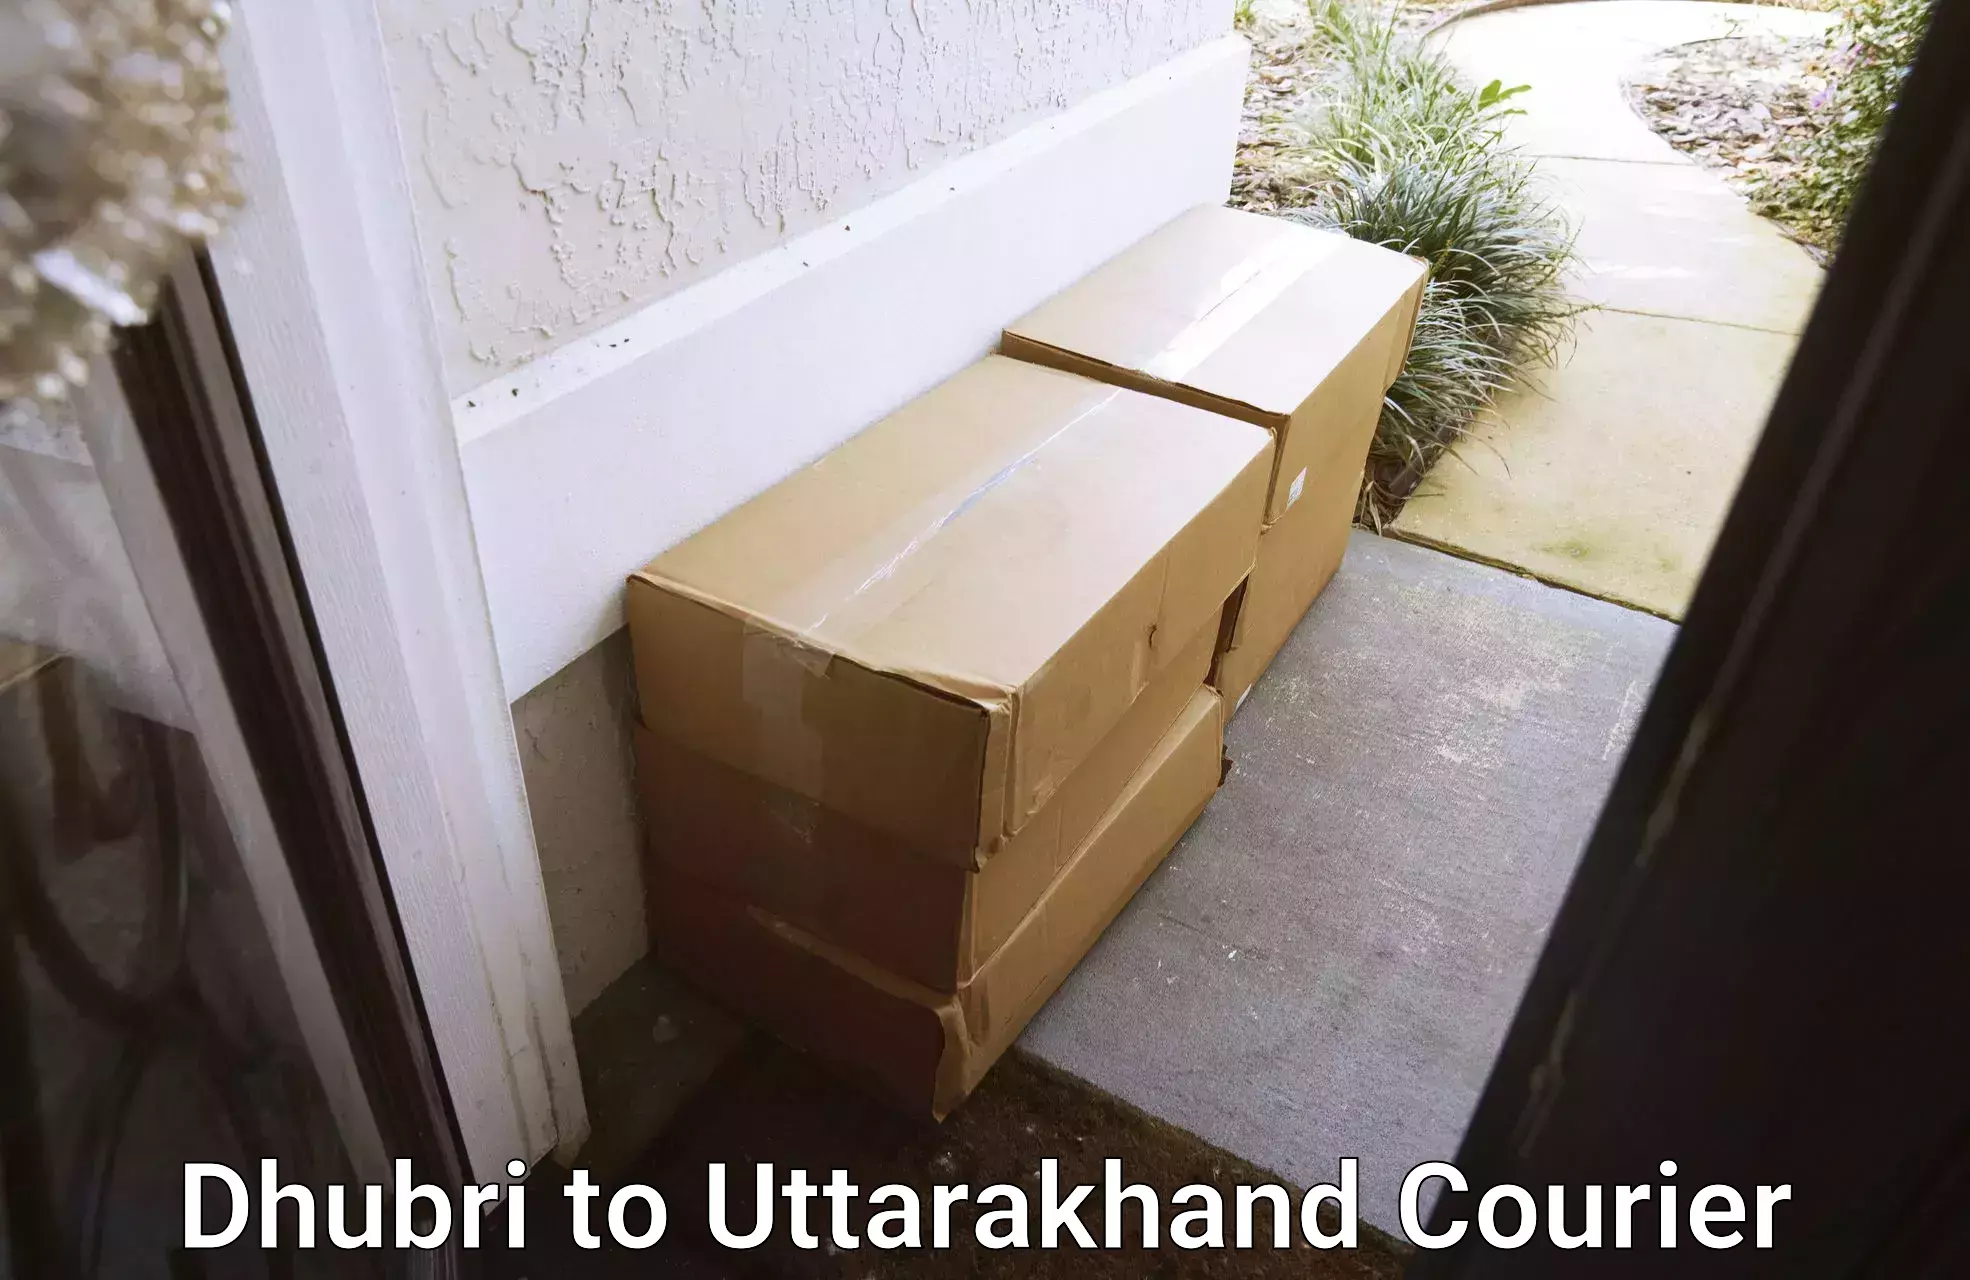 Custom courier packaging Dhubri to Almora